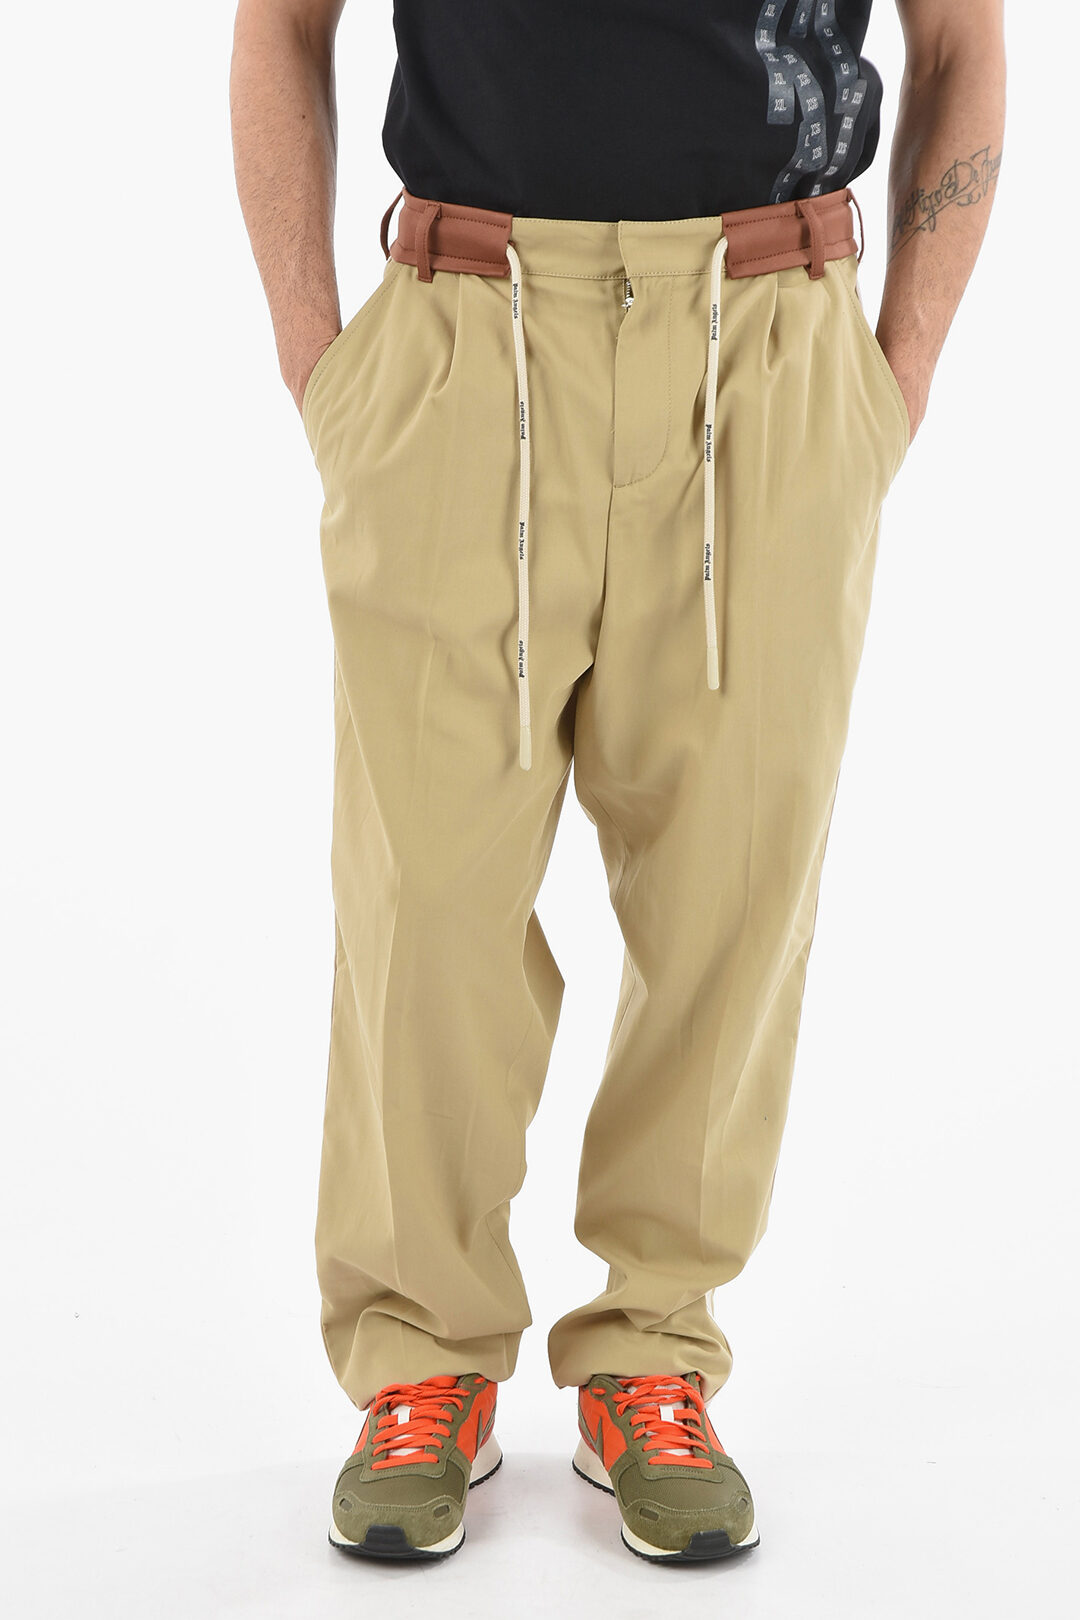 Palm Angels Contrasting Band Cotton Pants with Drawstring men